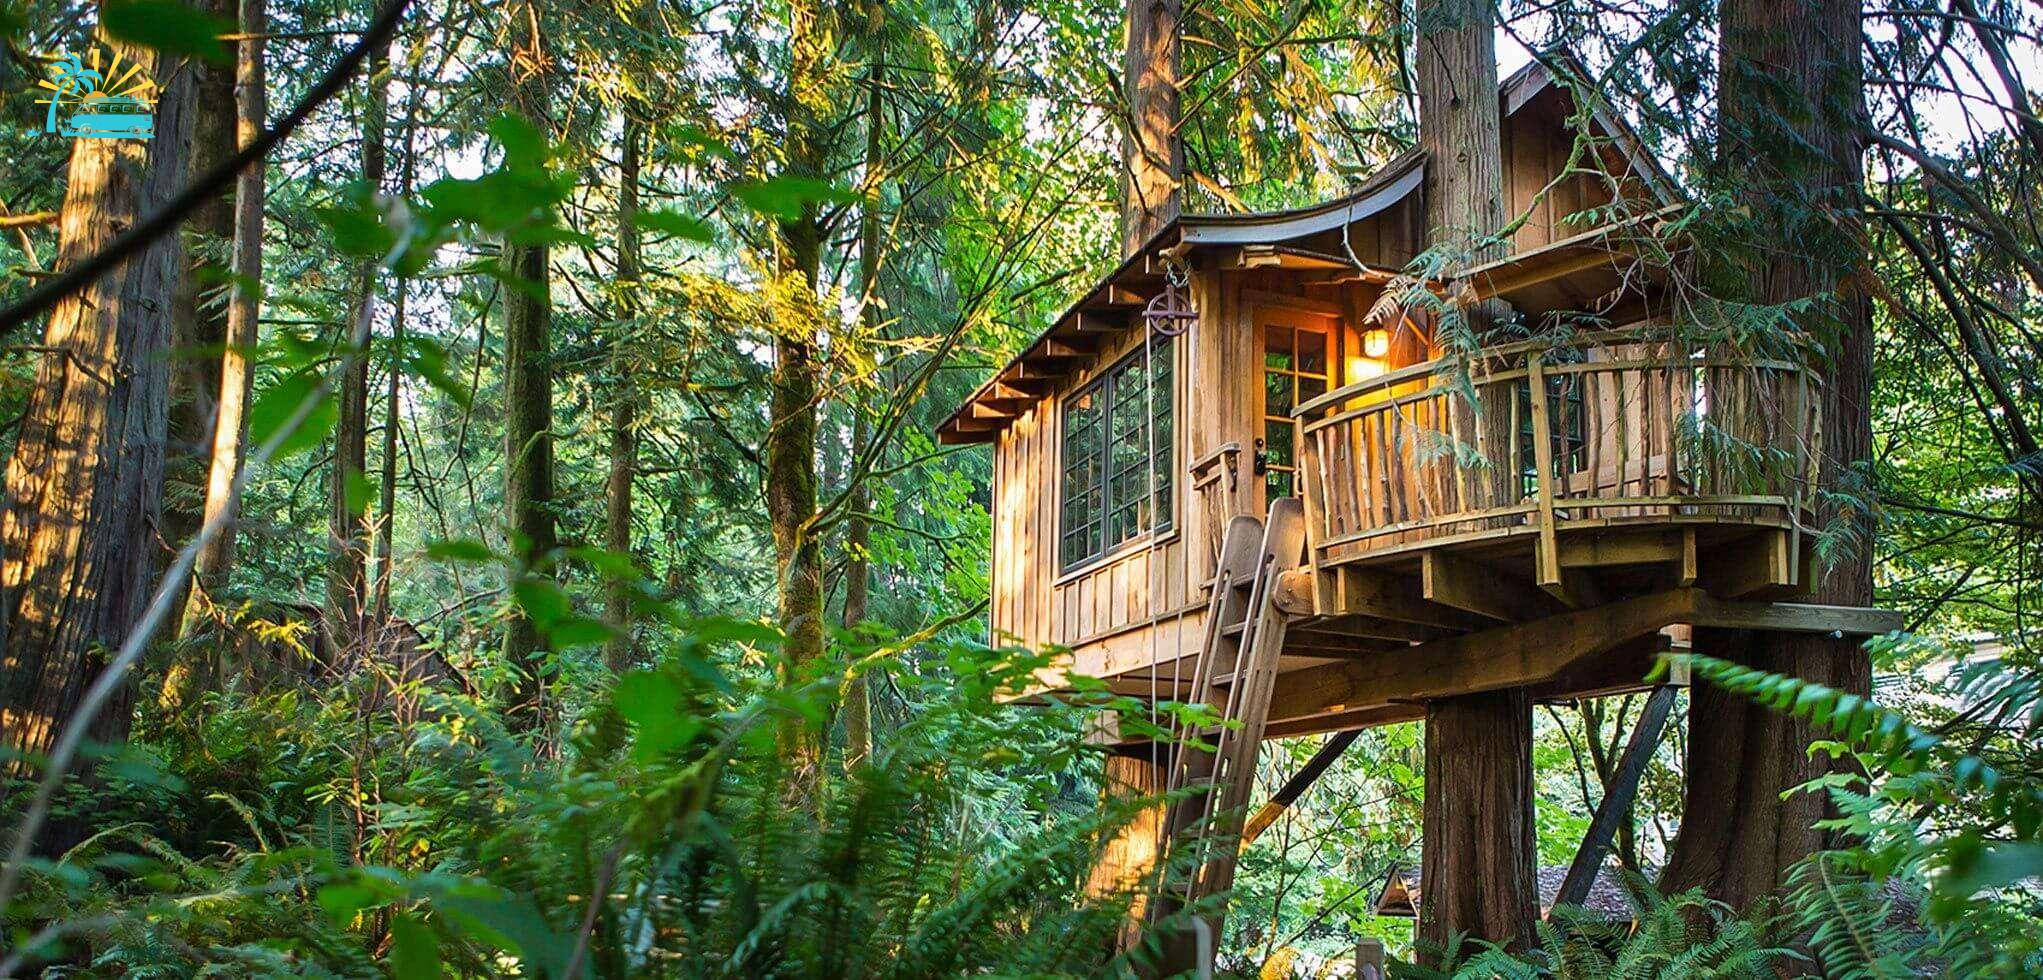 A front view of Treehouse Point in Issaquah in Washington